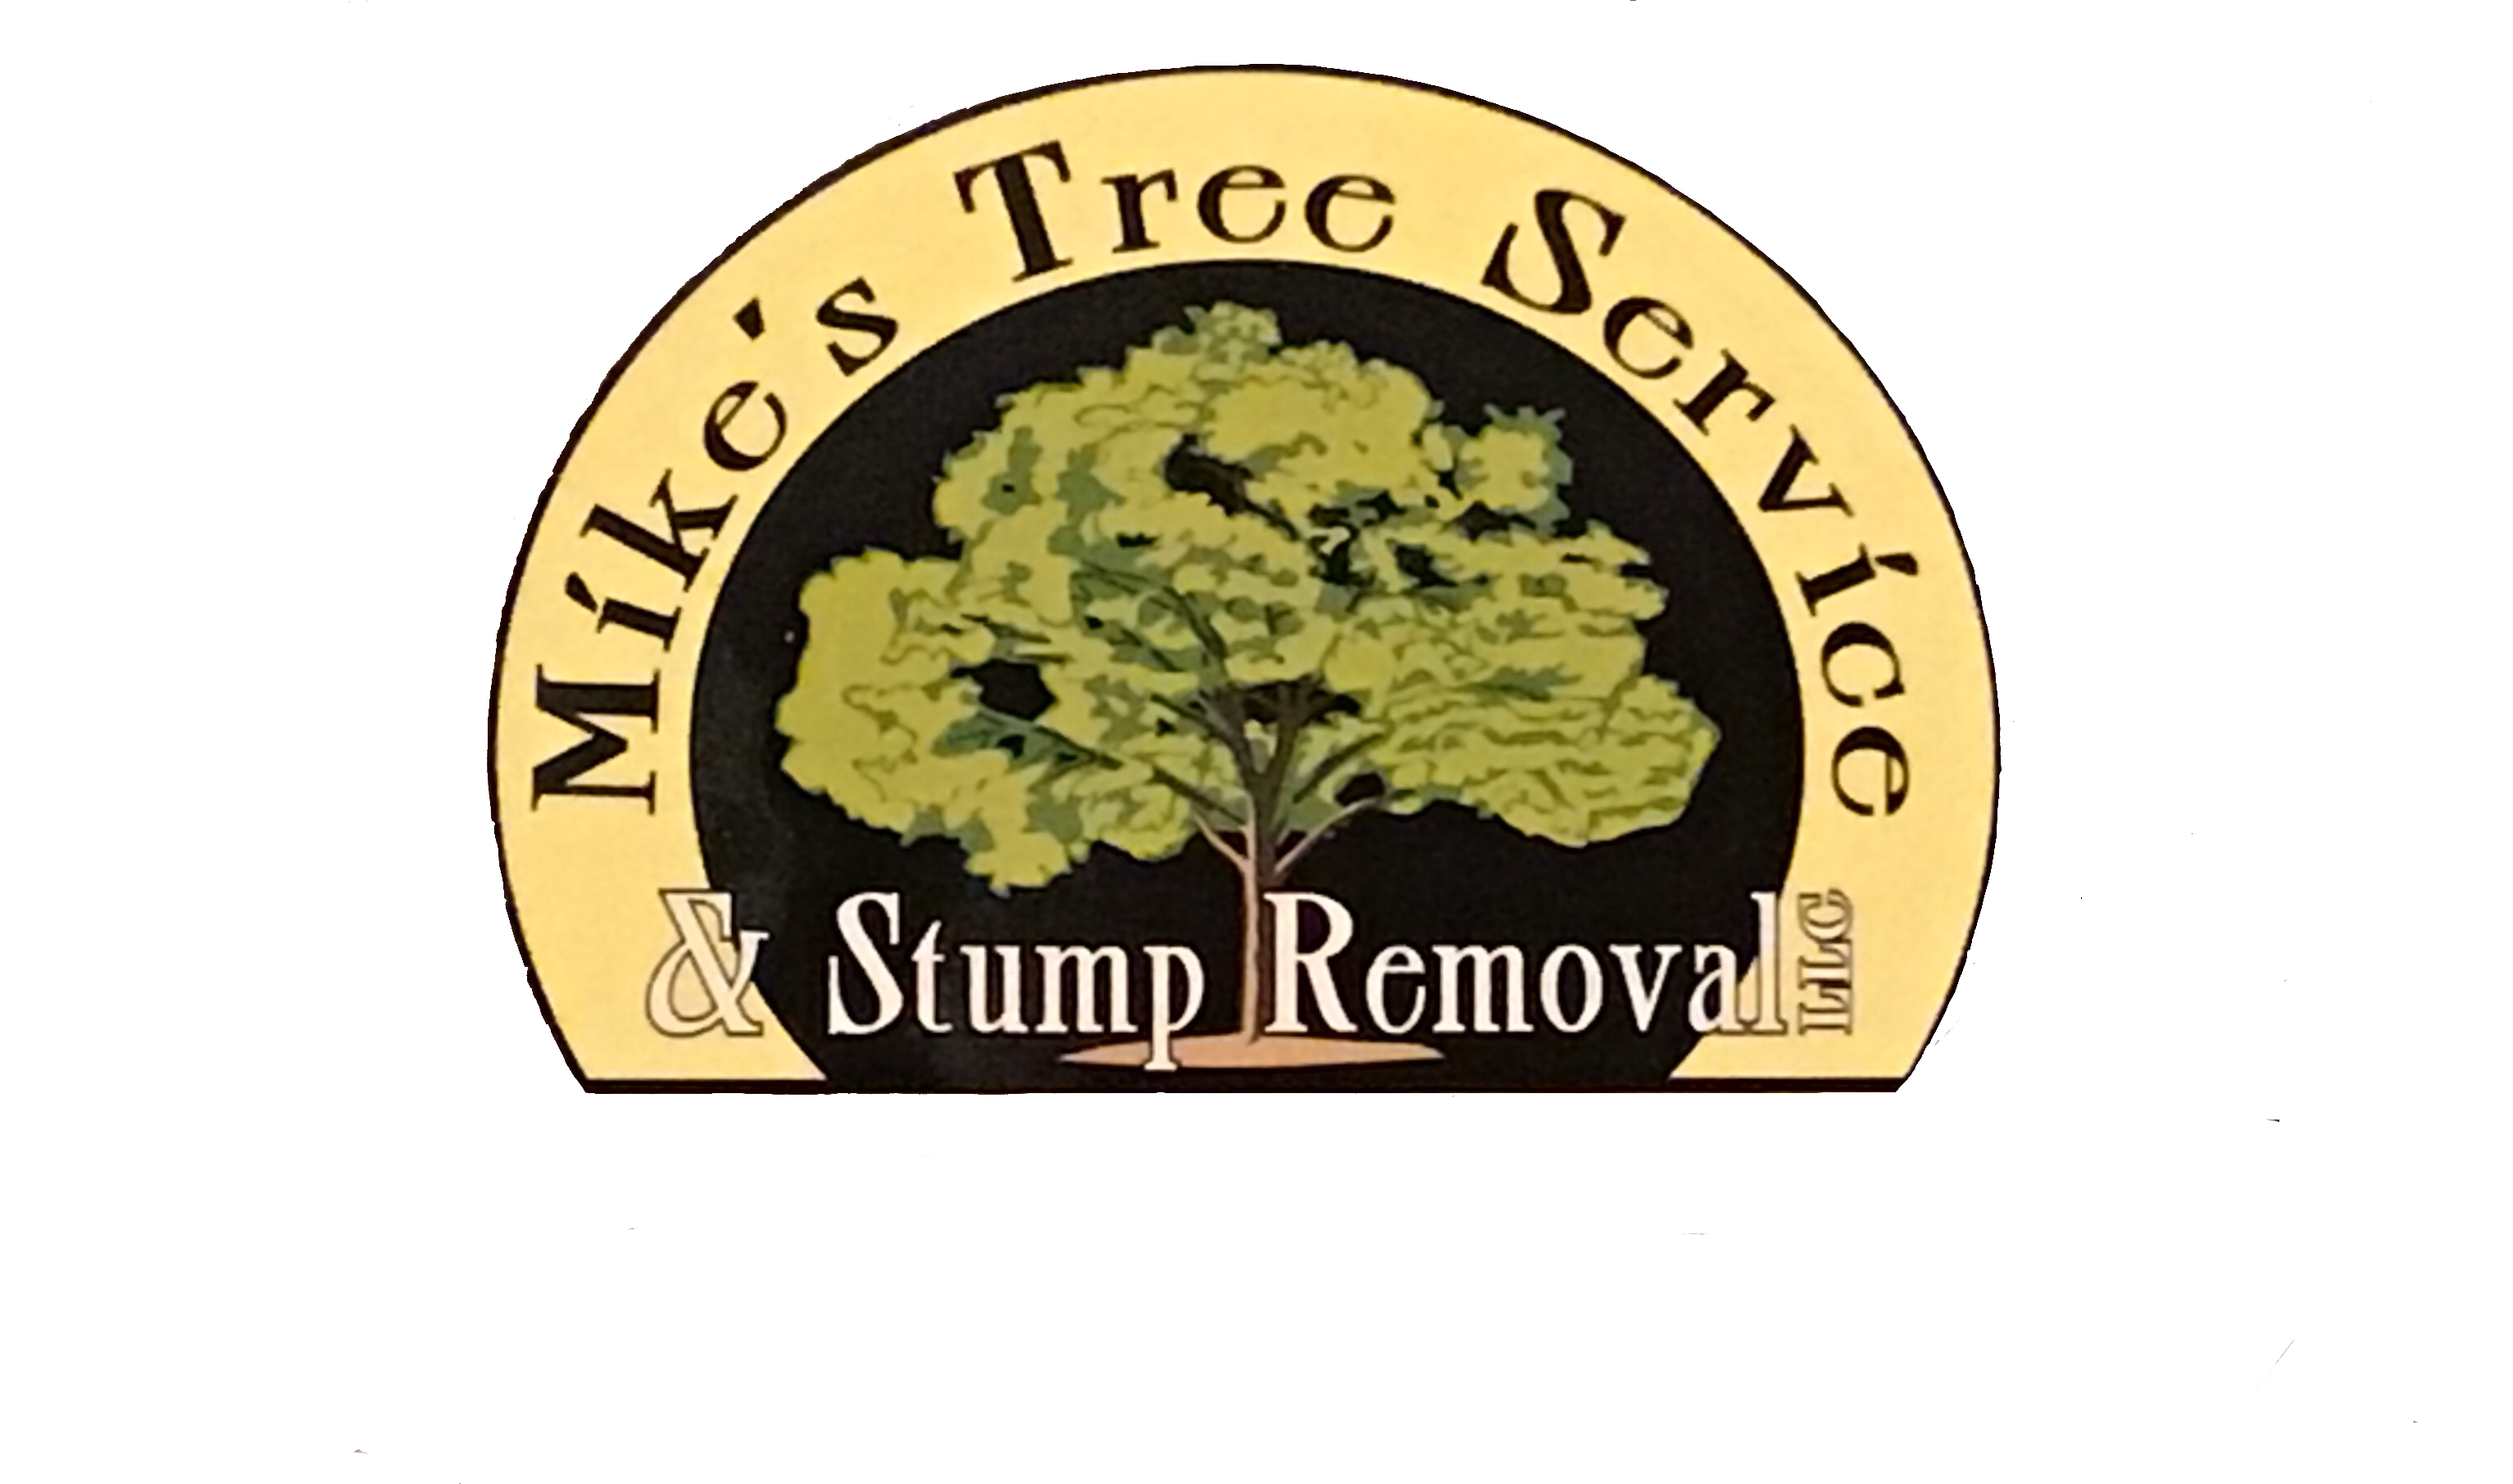 Mike's Tree Service and Stump Removal, LLC Logo